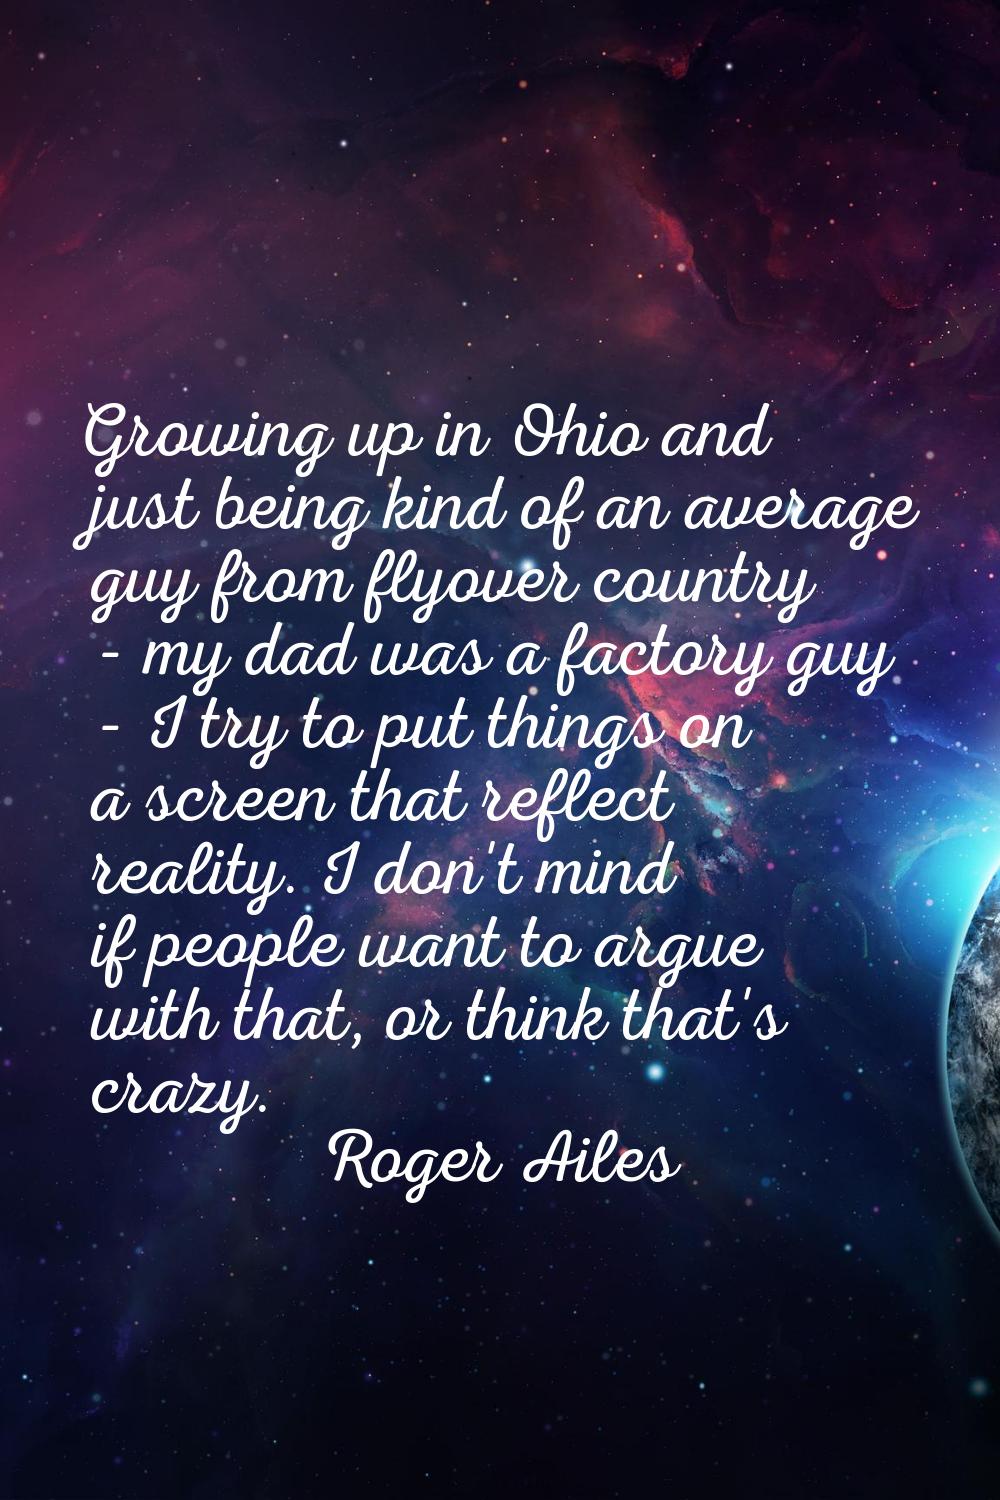 Growing up in Ohio and just being kind of an average guy from flyover country - my dad was a factor